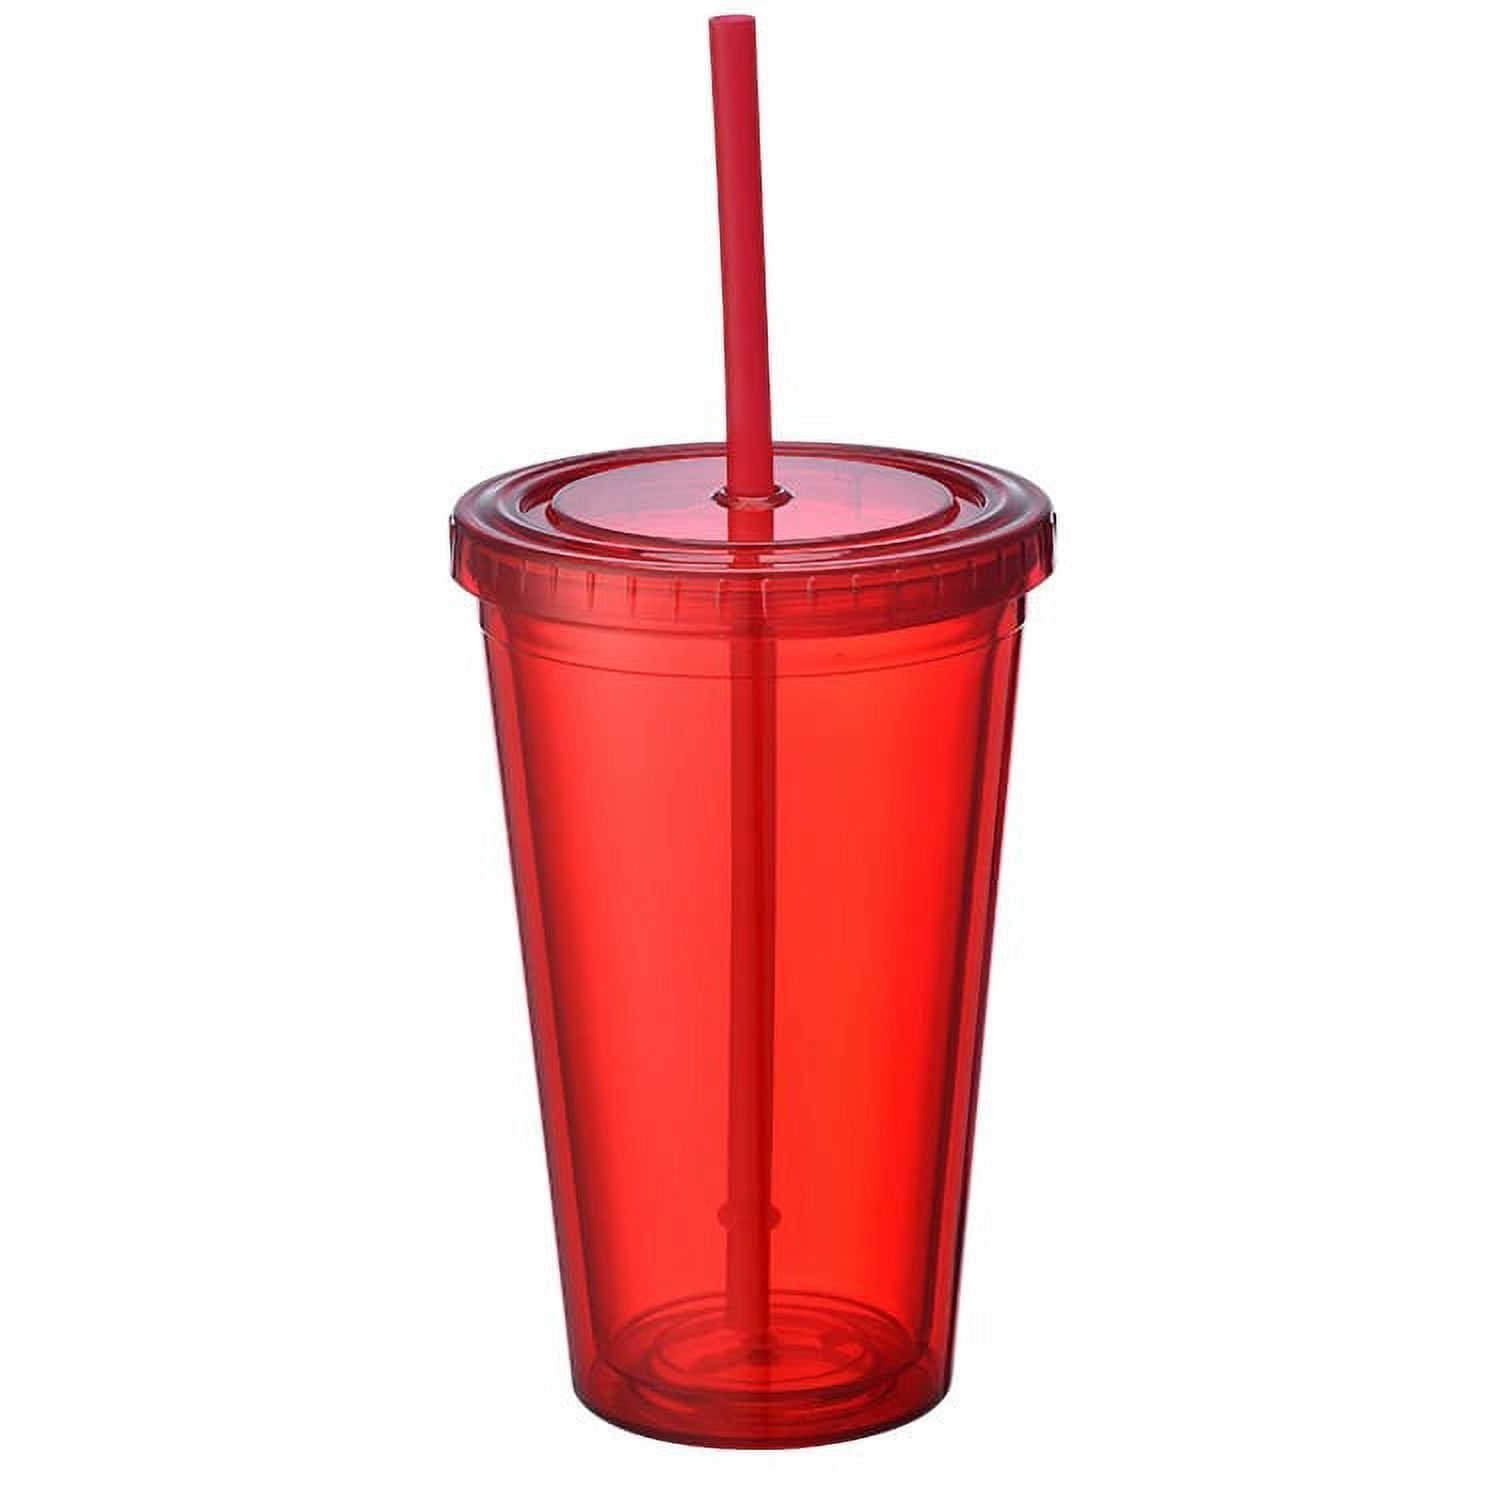 Acrylico 24oz Double Wall Plastic Tumbler, With Lids, Straws And Reusable  Cup Vibrant Colors For Outdoor/Indoor Use. From Weaving_web, $2.91